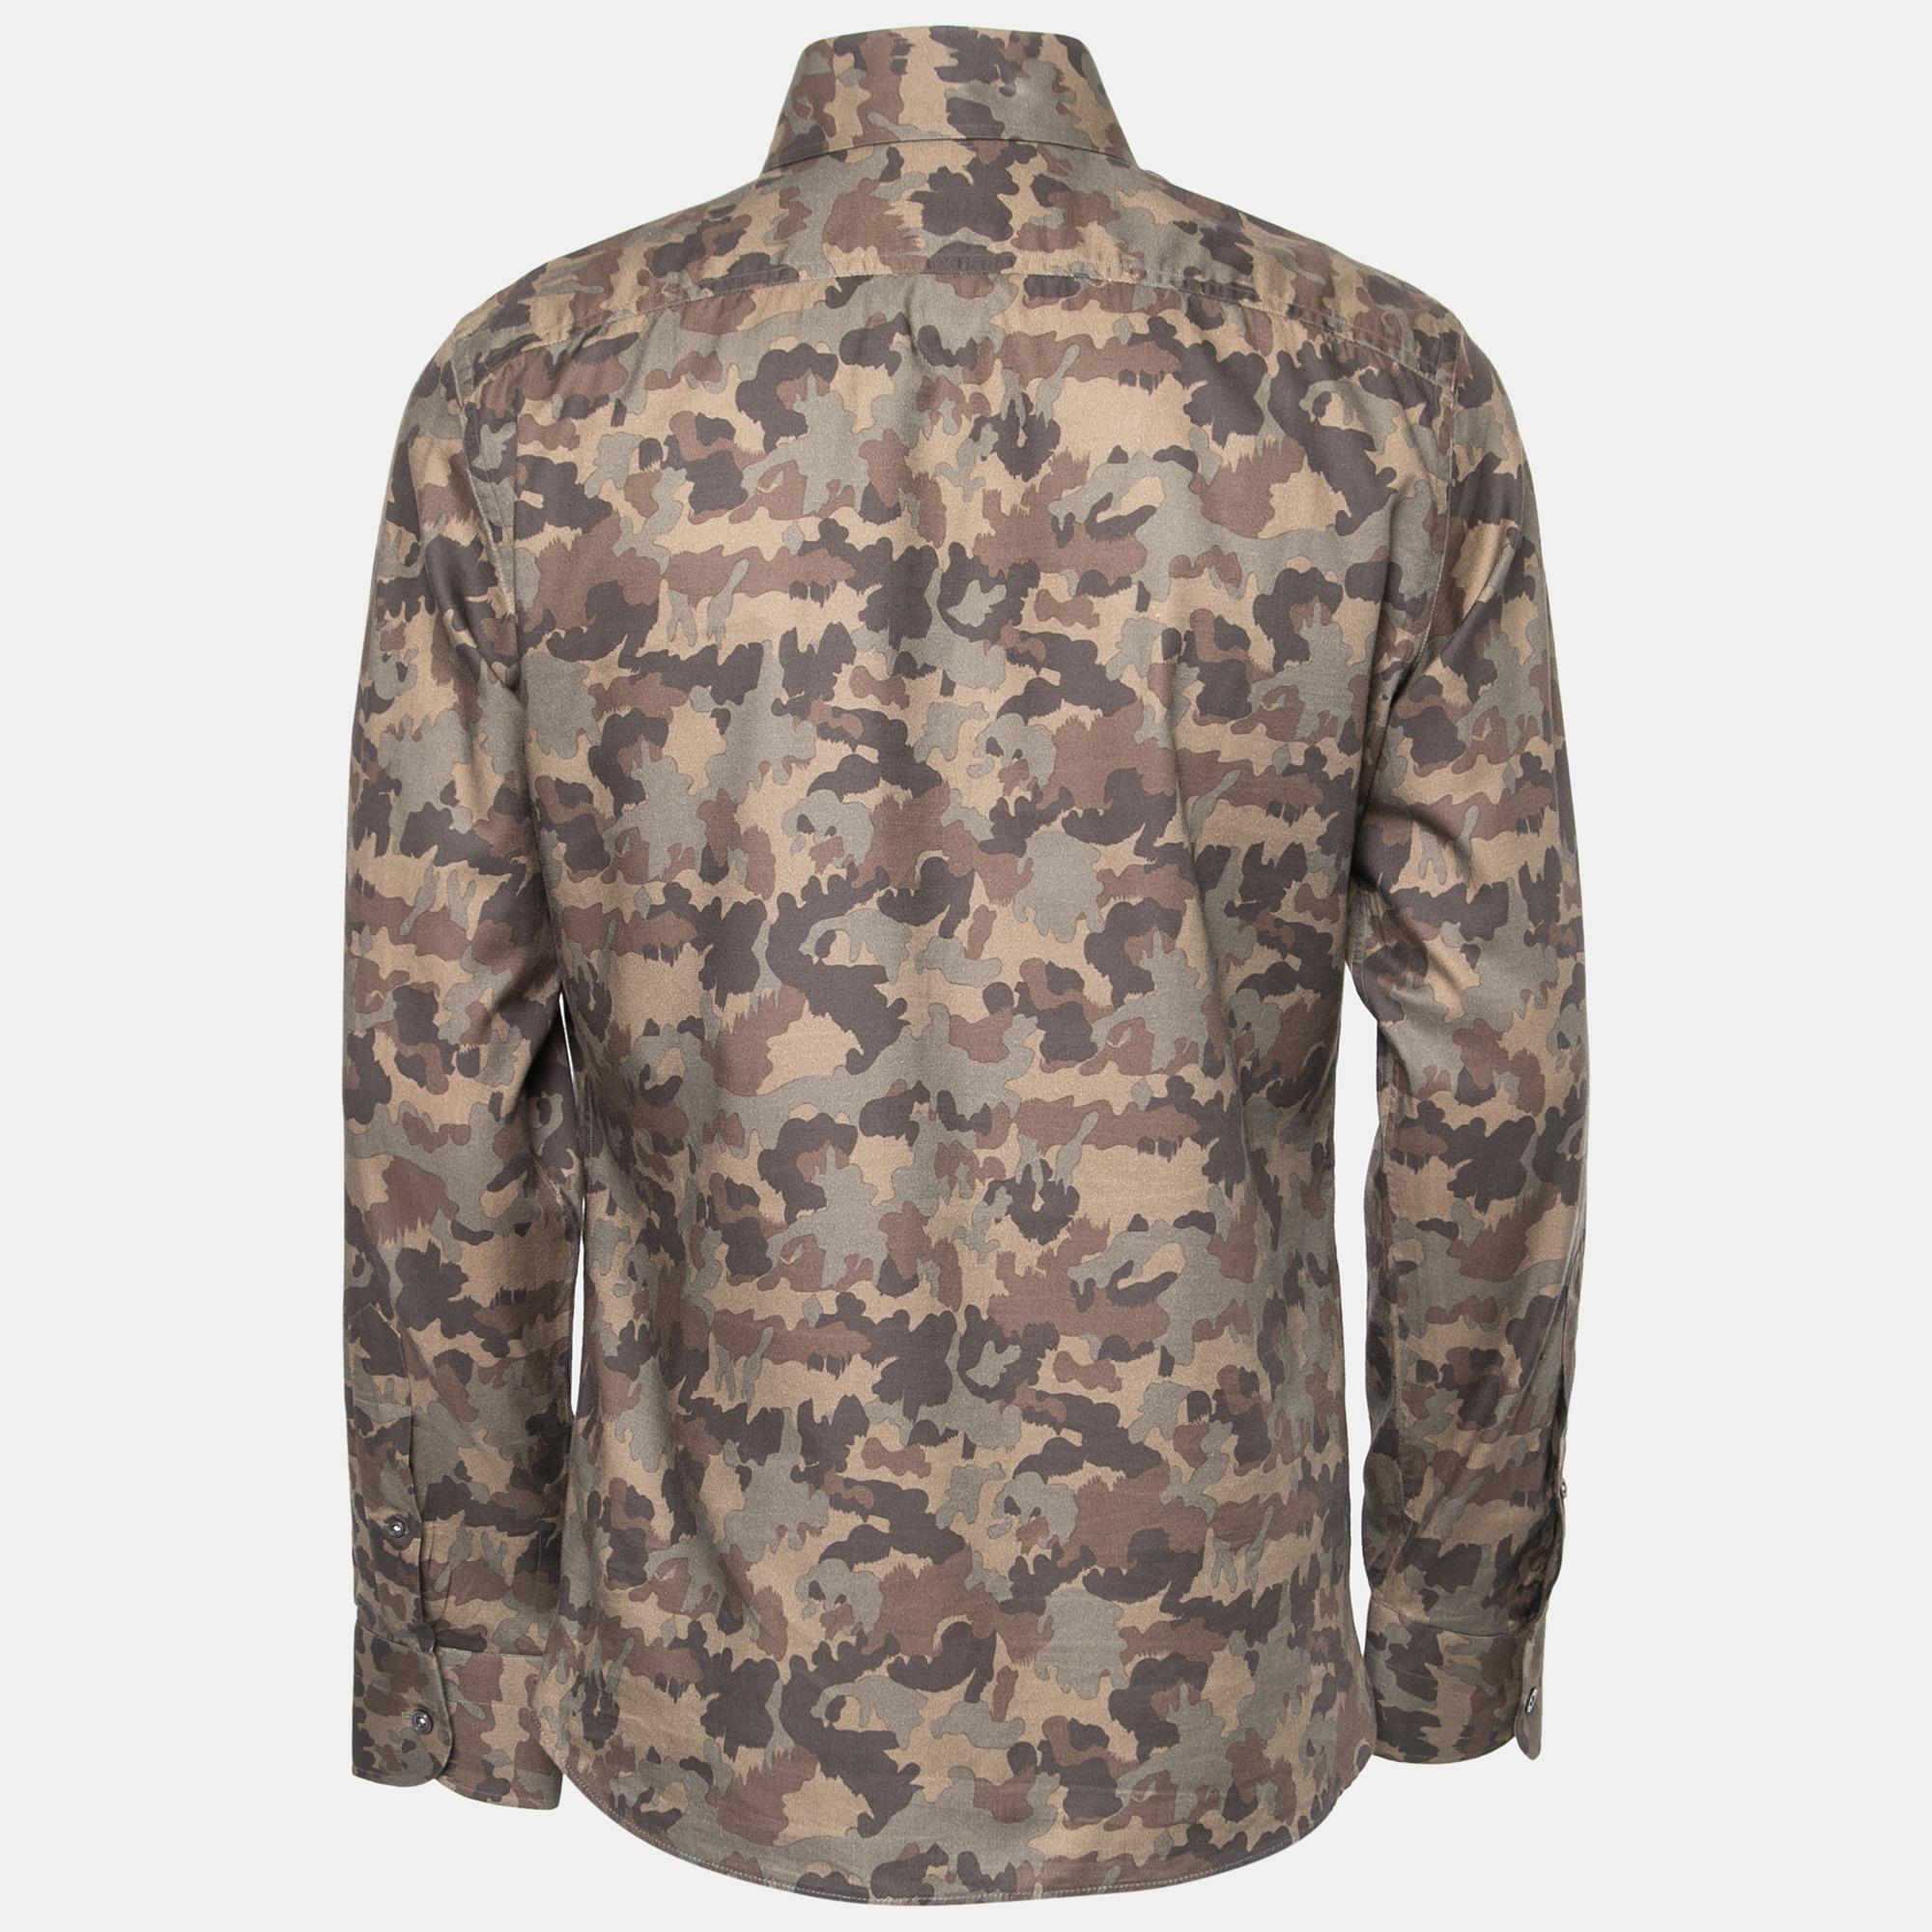 This Tom Ford shirt is striking and effortlessly chic with a camouflage print. Made from cotton in a green hue, it displays long sleeves, front button closure, and a classic neckline. Pair it with jeans or pants for a stylish ensemble.

